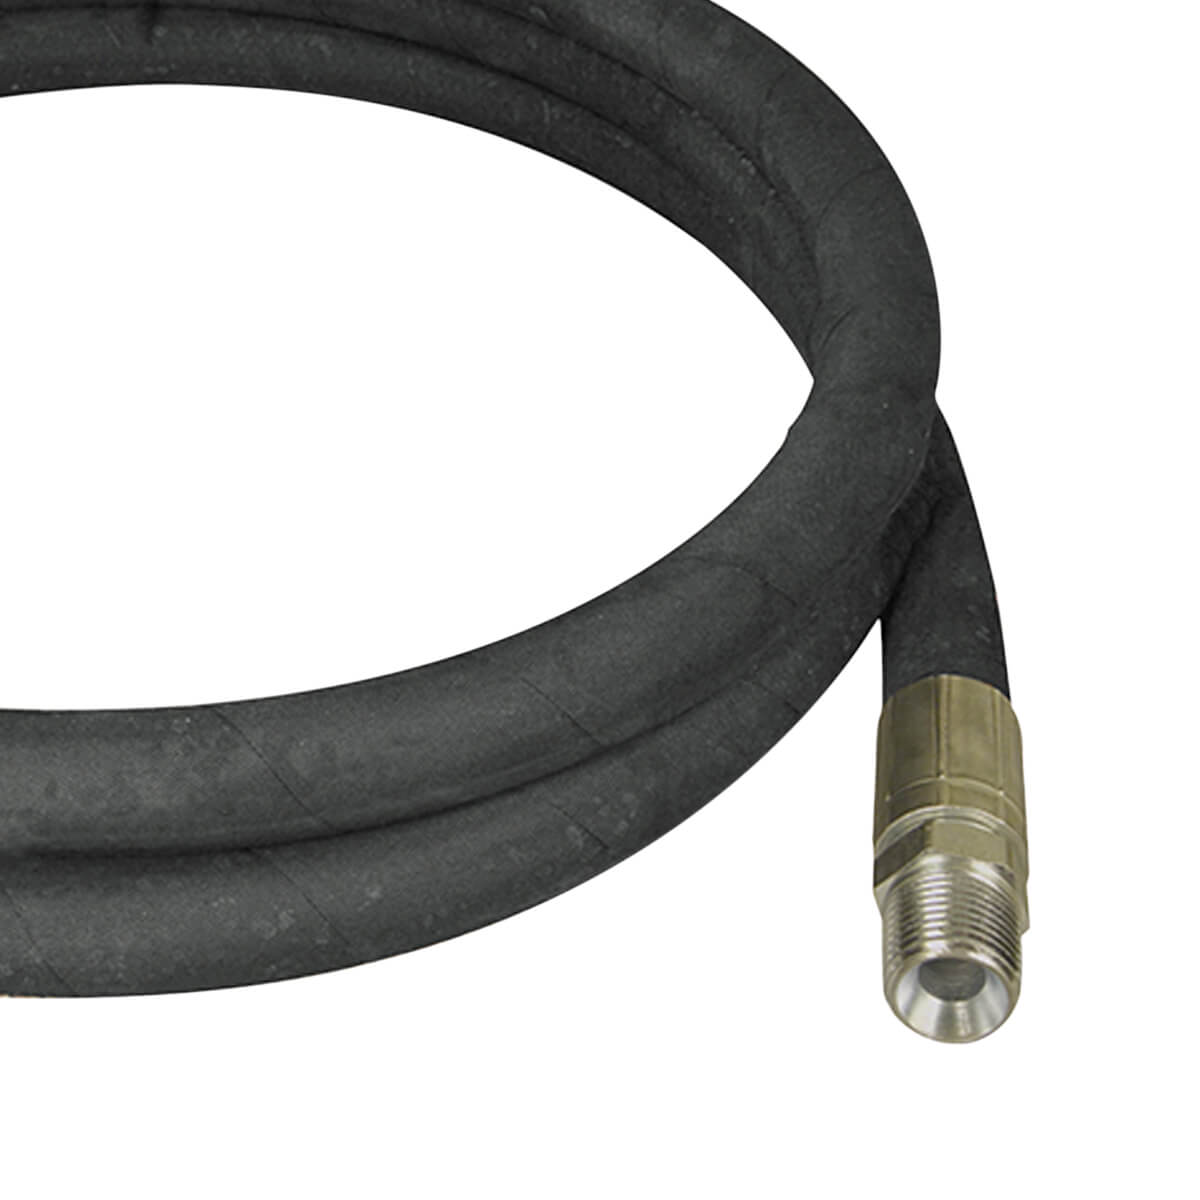 Hydraulic Hose Assembly - Male x Male - 1/2-in x 36-in